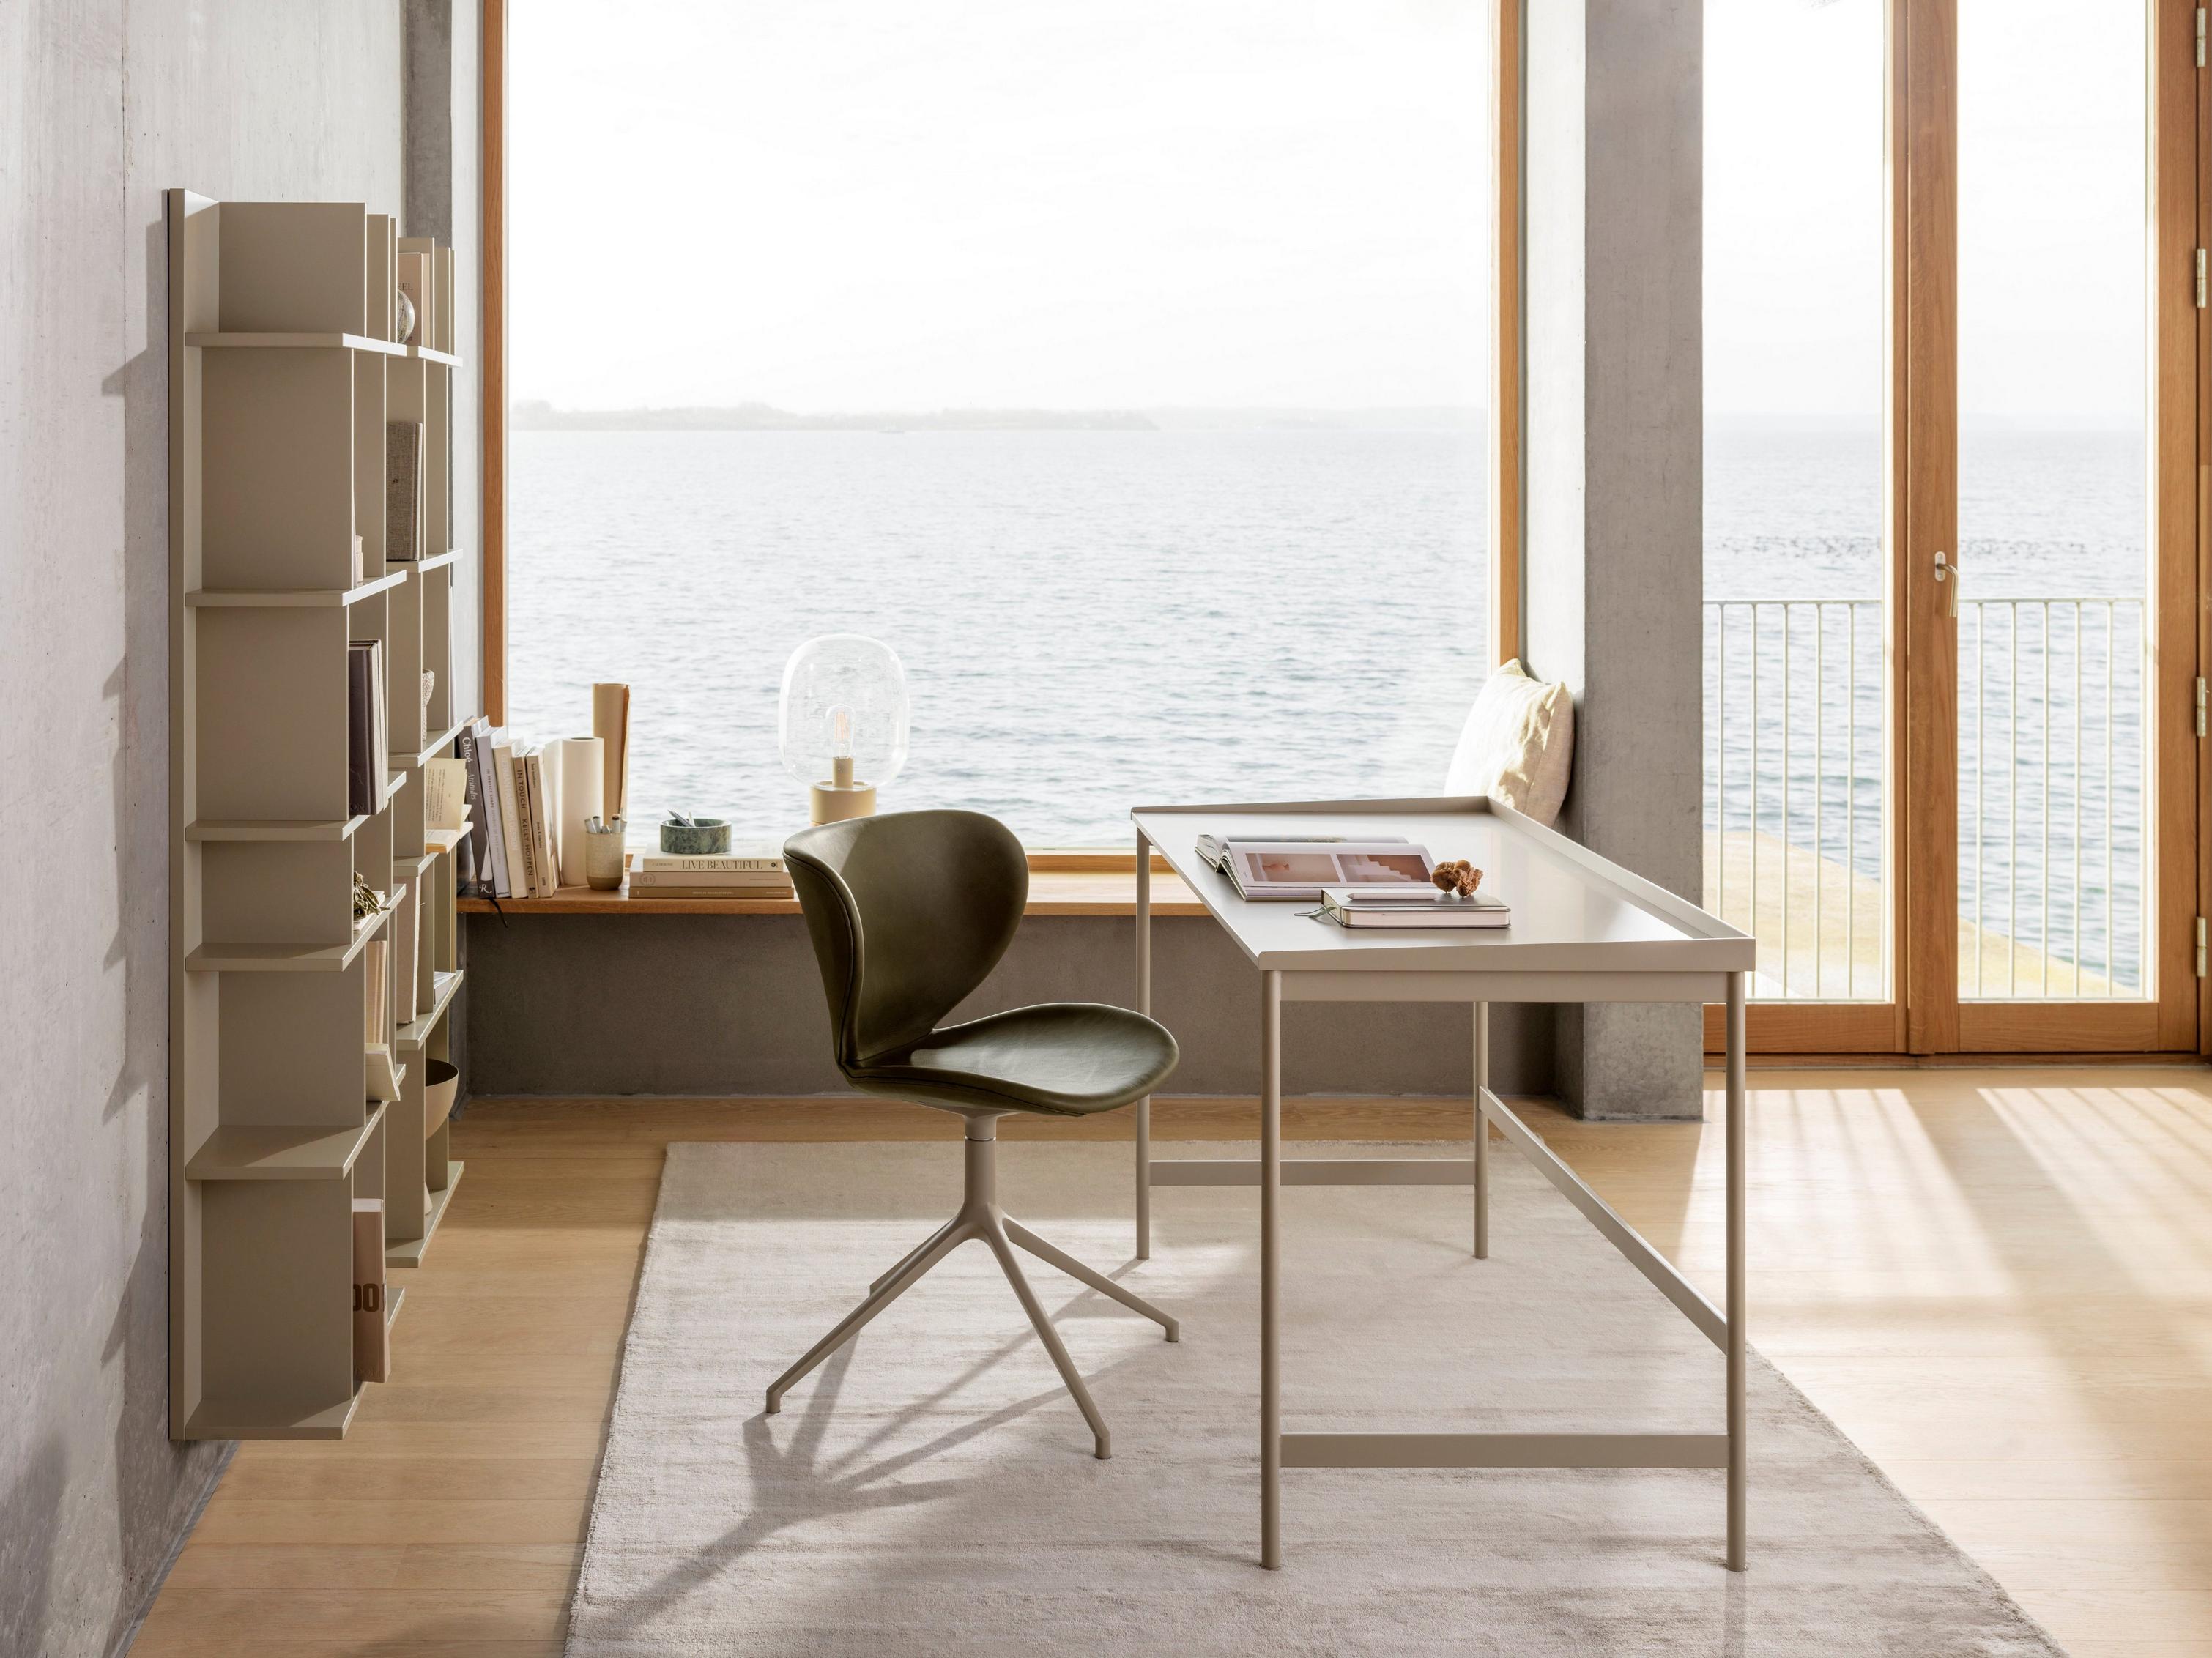 Seaside home office with a white desk, green chair, and shelving, with large windows and ocean view.